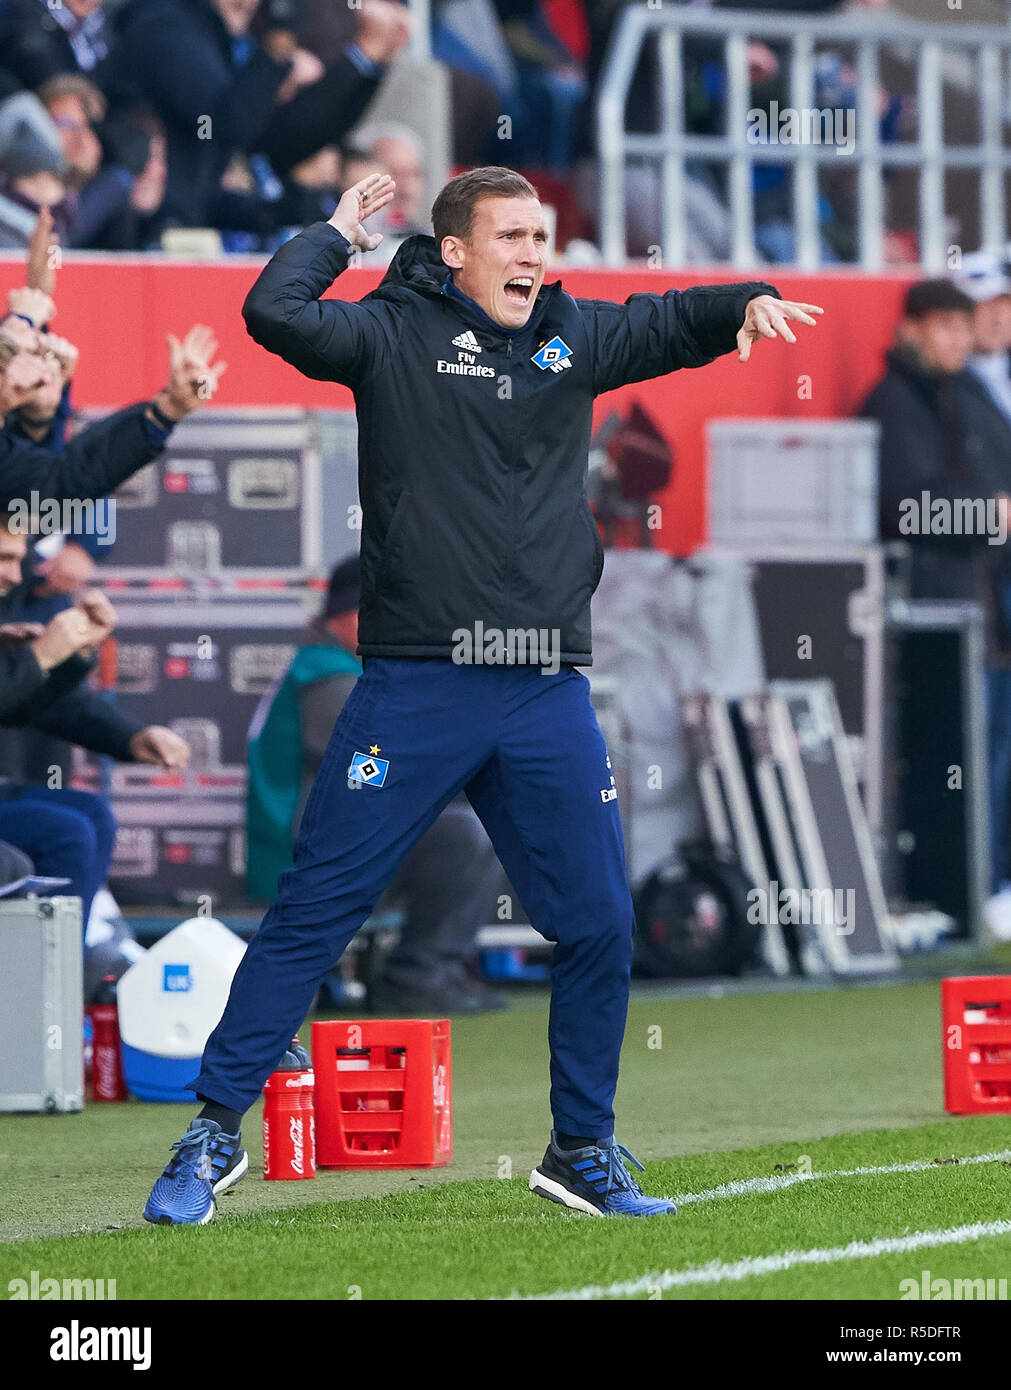 Ingolstadt, Germany, 1st December 2018.Germany, 1st December 2018. Hannes WOLF, Trainer HSV Torjubel 0-1 Aaron HUNT, HSV 14 Cheering, joy, emotions, celebrating, laughing, cheering, rejoice, tearing up the arms, clenching the fist, celebrate, celebration,  FC INGOLSTADT - HAMBURGER SV   - DFL REGULATIONS PROHIBIT ANY USE OF PHOTOGRAPHS as IMAGE SEQUENCES and/or QUASI-VIDEO -  2.German Soccer League , Ingolstadt, December 01, 2018  Season 2018/2019, matchday 15, HSV, Schanzer © Peter Schatz / Alamy Live News Stock Photo